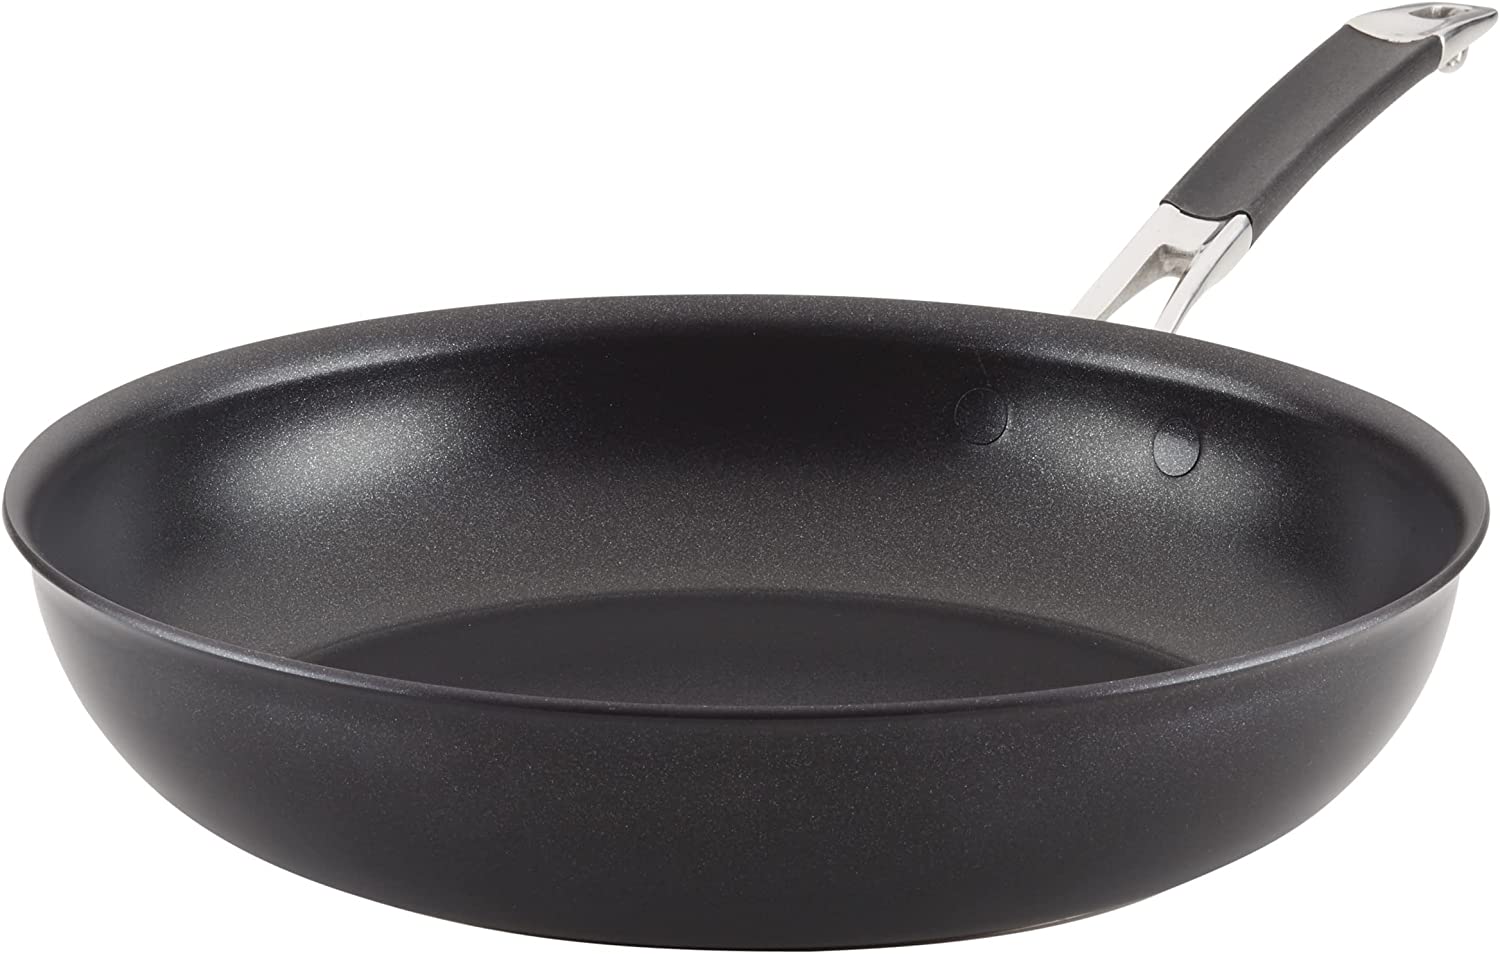 12" Anolon 87538 Smart Stack Hard Anodized Nonstick Frying Pan (Black) $35.75 + Free Shipping